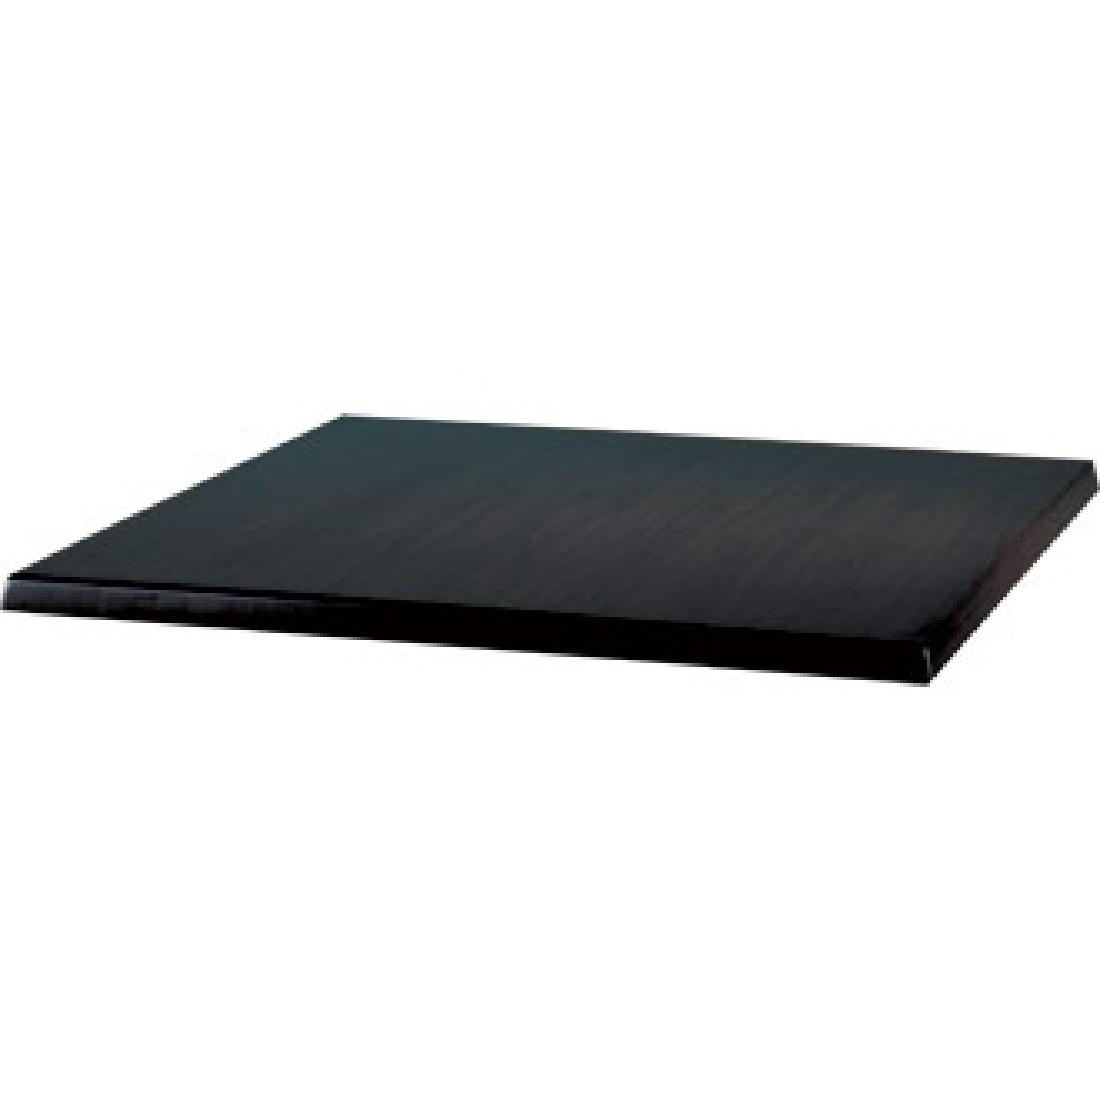 Werzalit Pre-drilled Square Table Top  Black 800mm